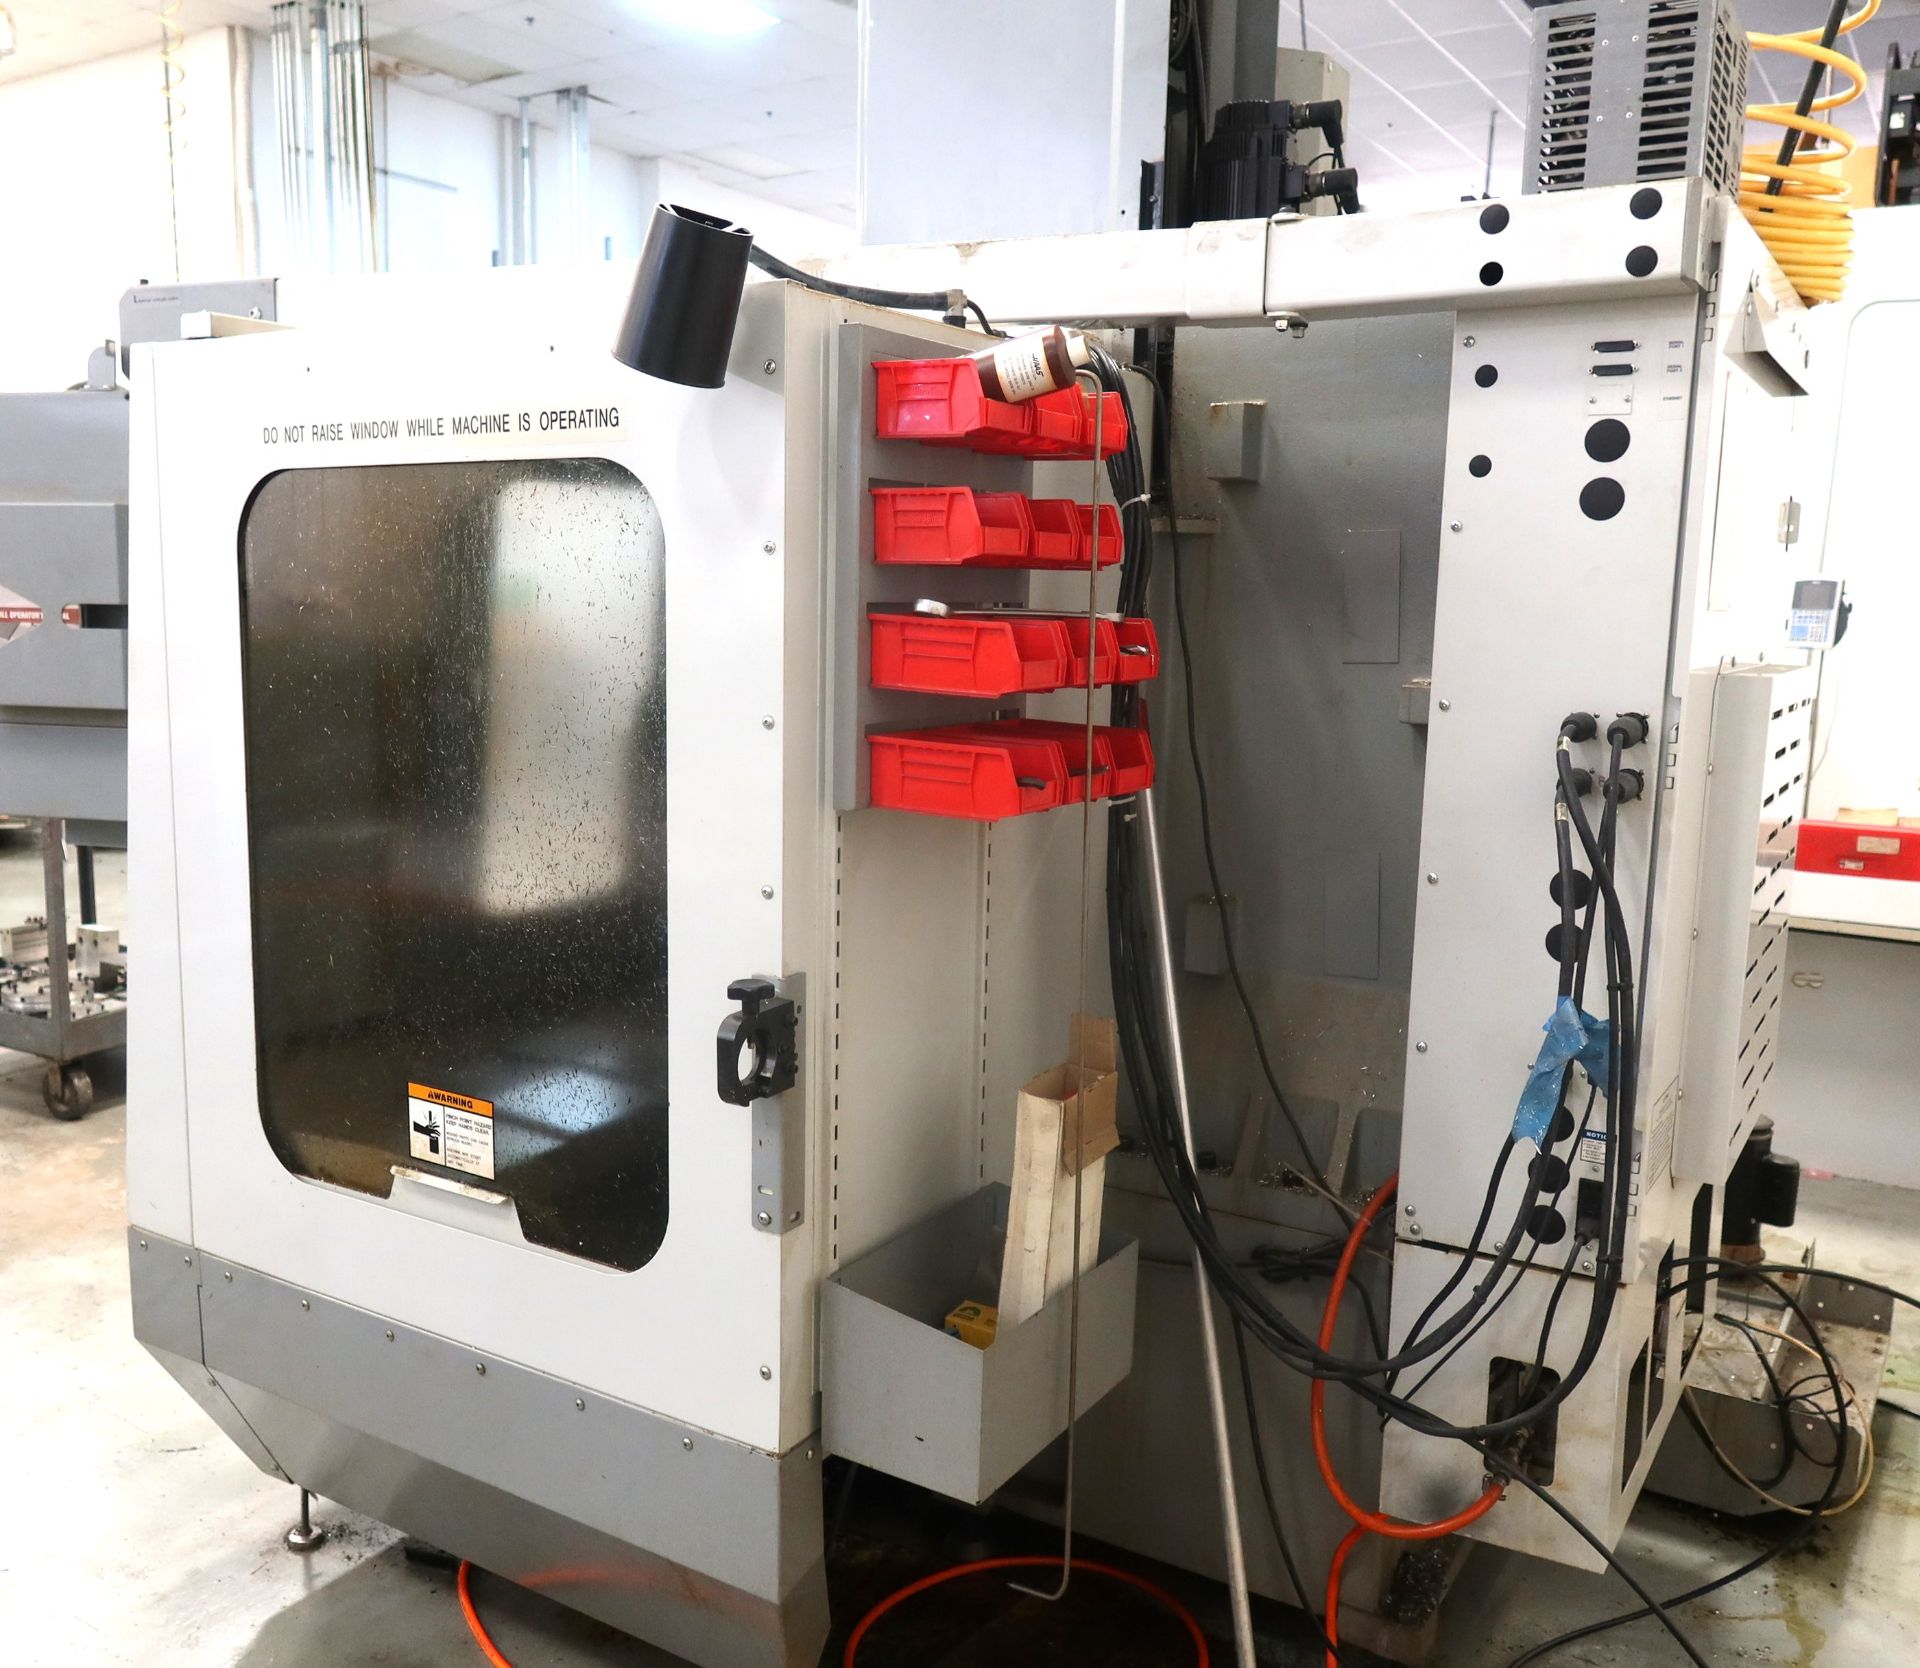 Haas VF-2D 5-Axis CNC Vertical Machining Center, SN 1054011, Mfg 12/06 - Image 10 of 11